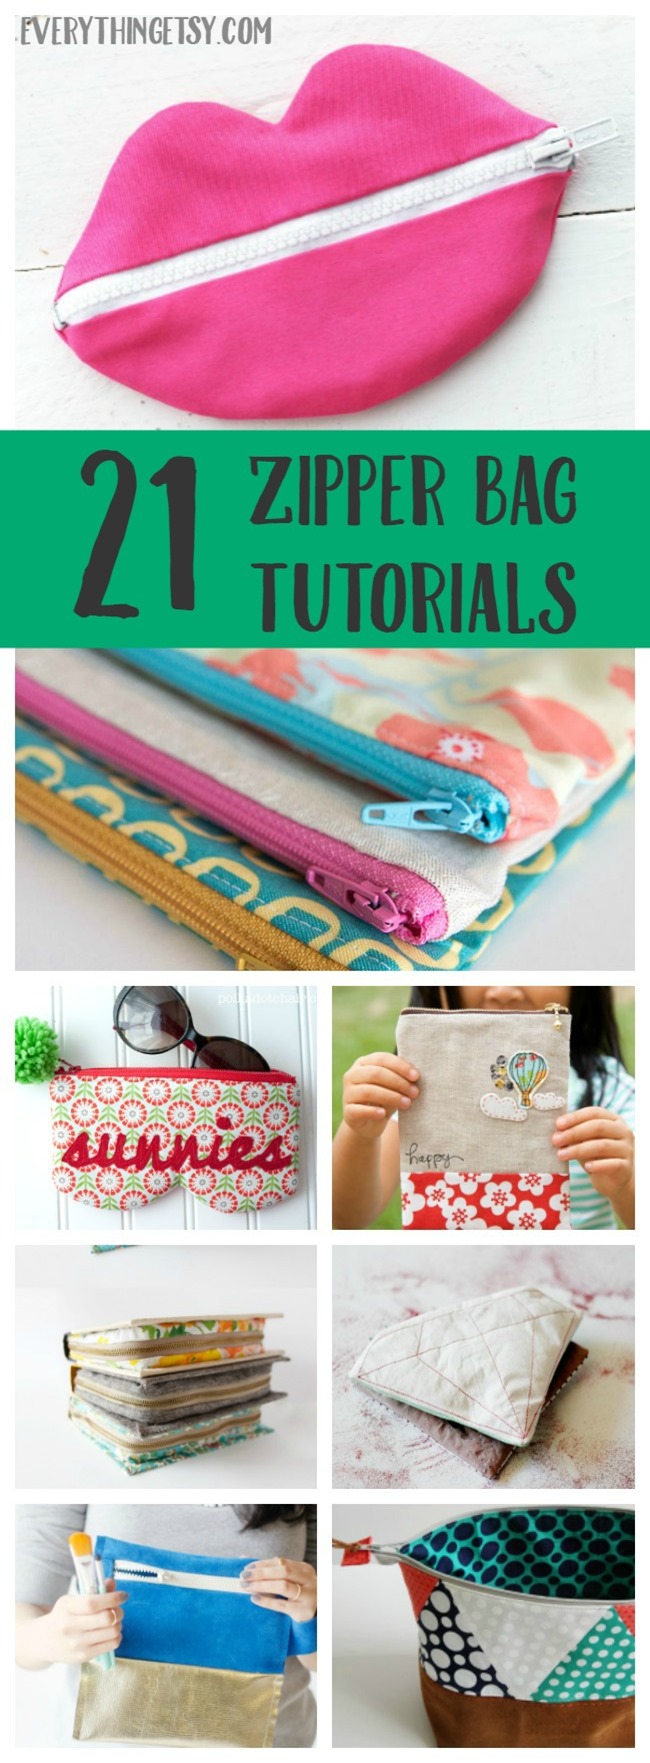 21 Zipper Bag Sewing Tutorials - Cute and Easy Patterns on EverythingEtsy.com